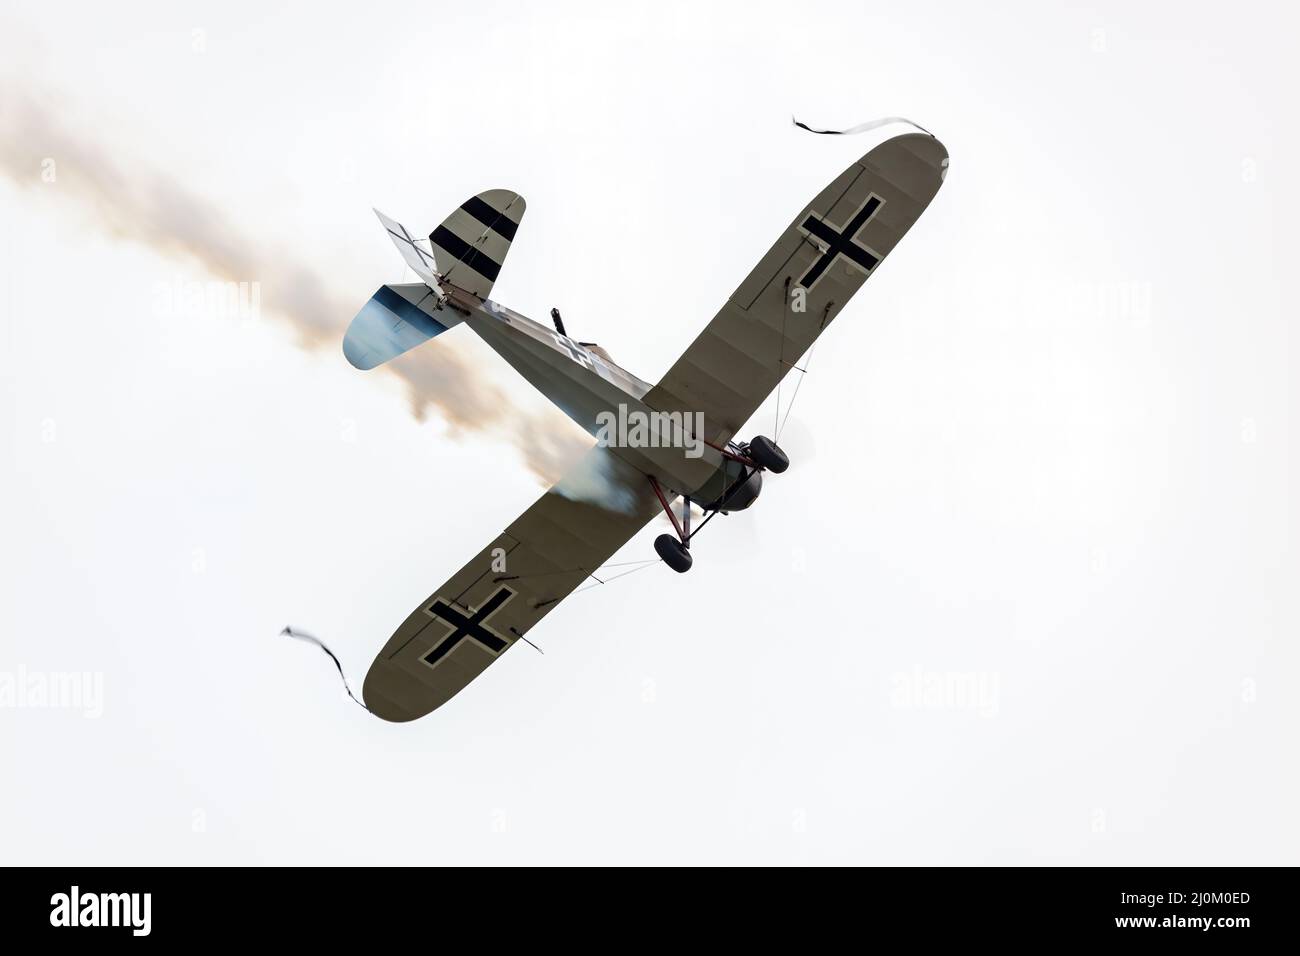 Junkers CL.I ground-attack aircraft Stock Photo